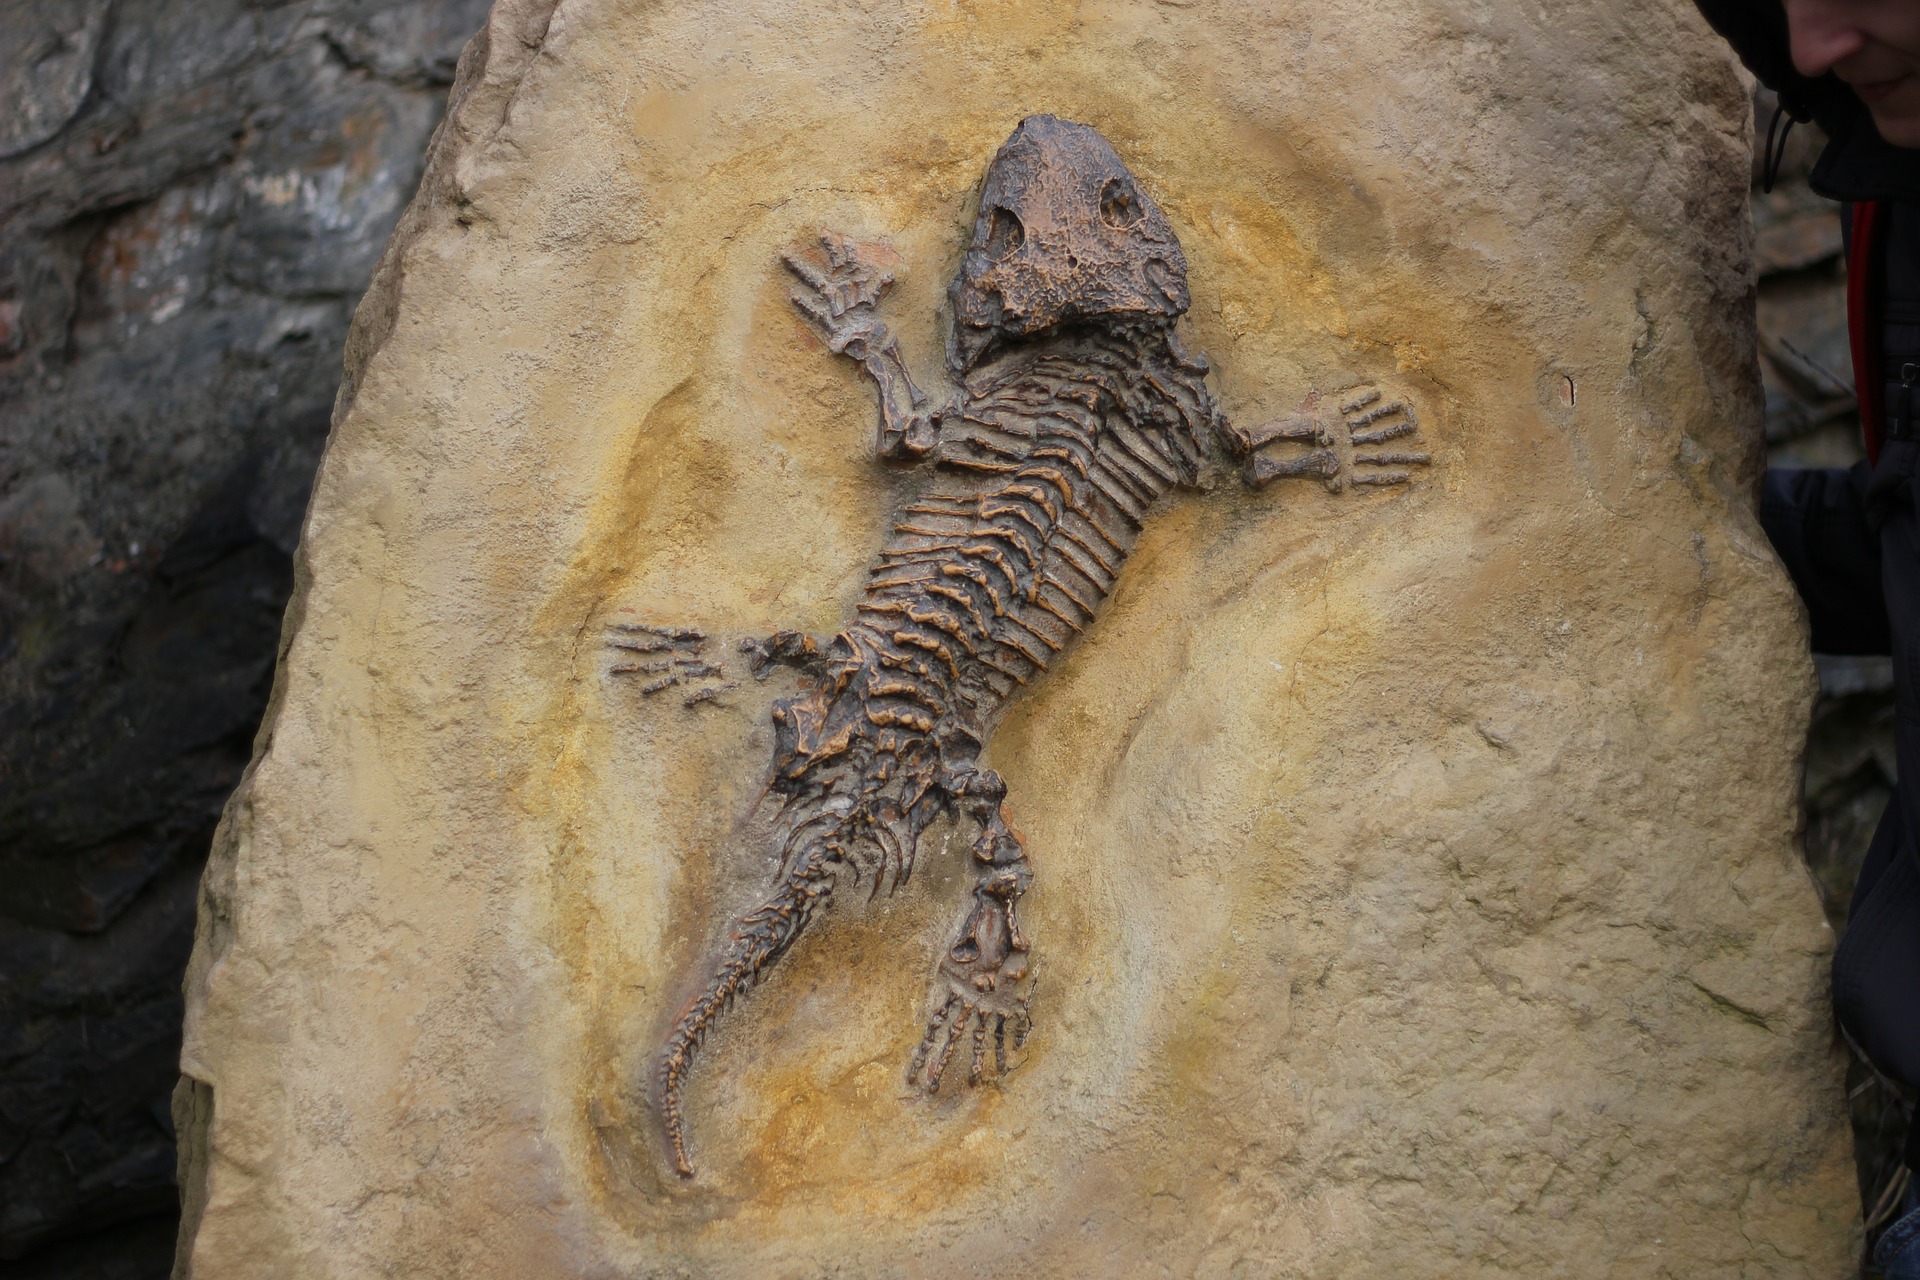 How fossil preservation and public health are intertwined